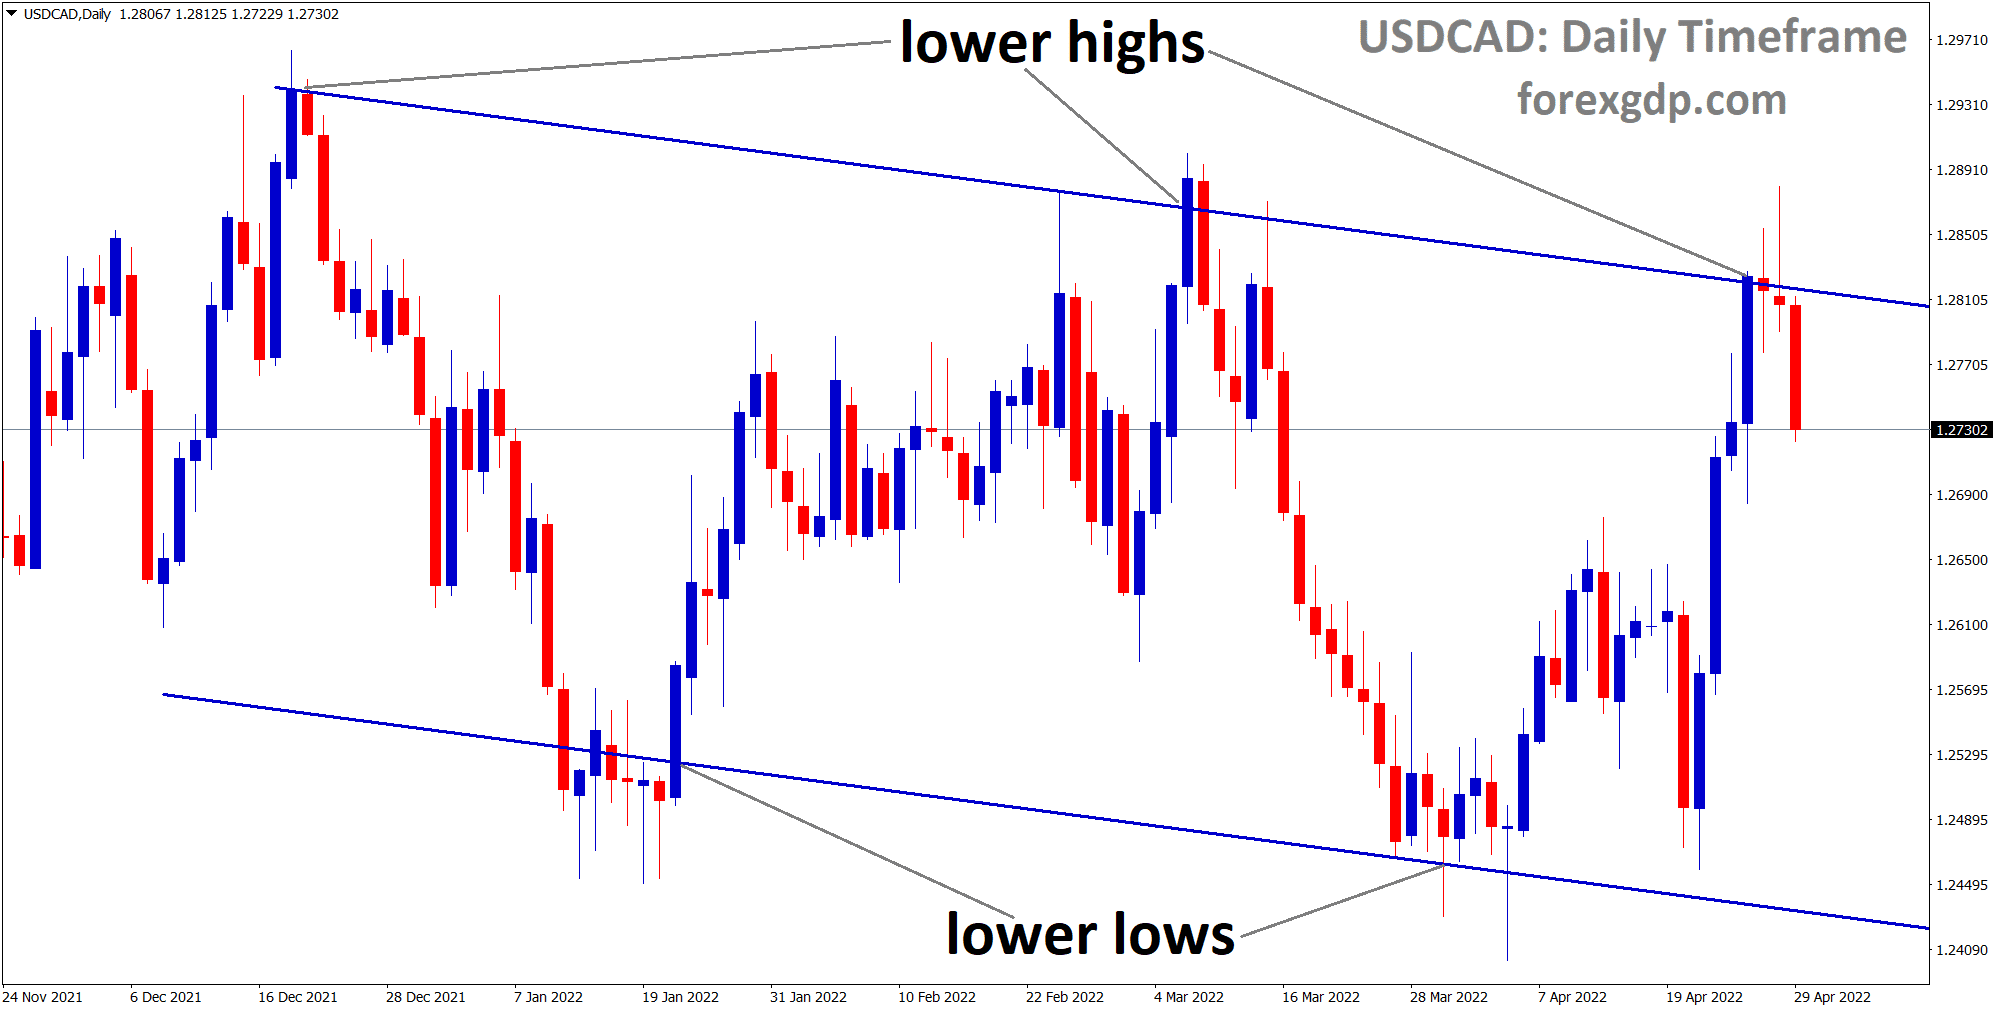 USDCAD is moving in Descending channel and reached lower high area.